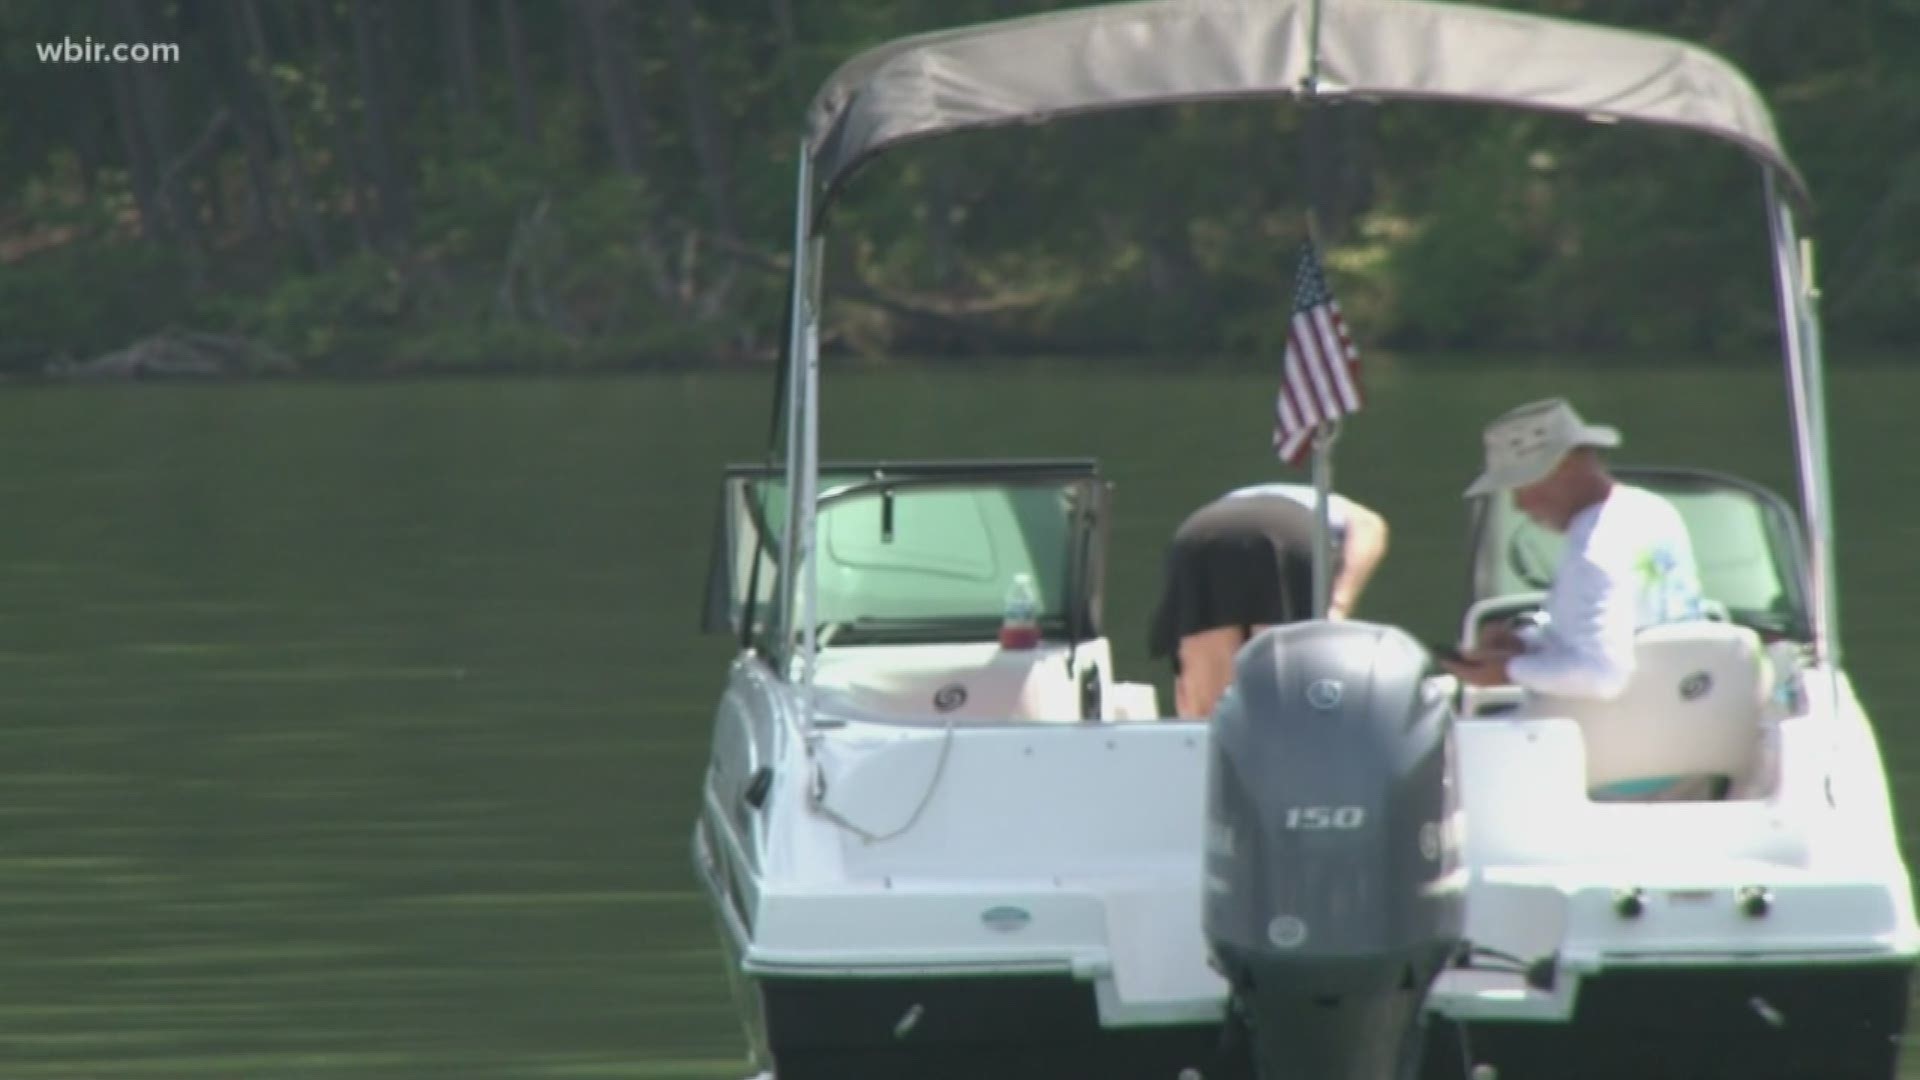 Free Rides 4 Vets gives veterans and their families rides on Tellico and Fort Loudon Lakes.